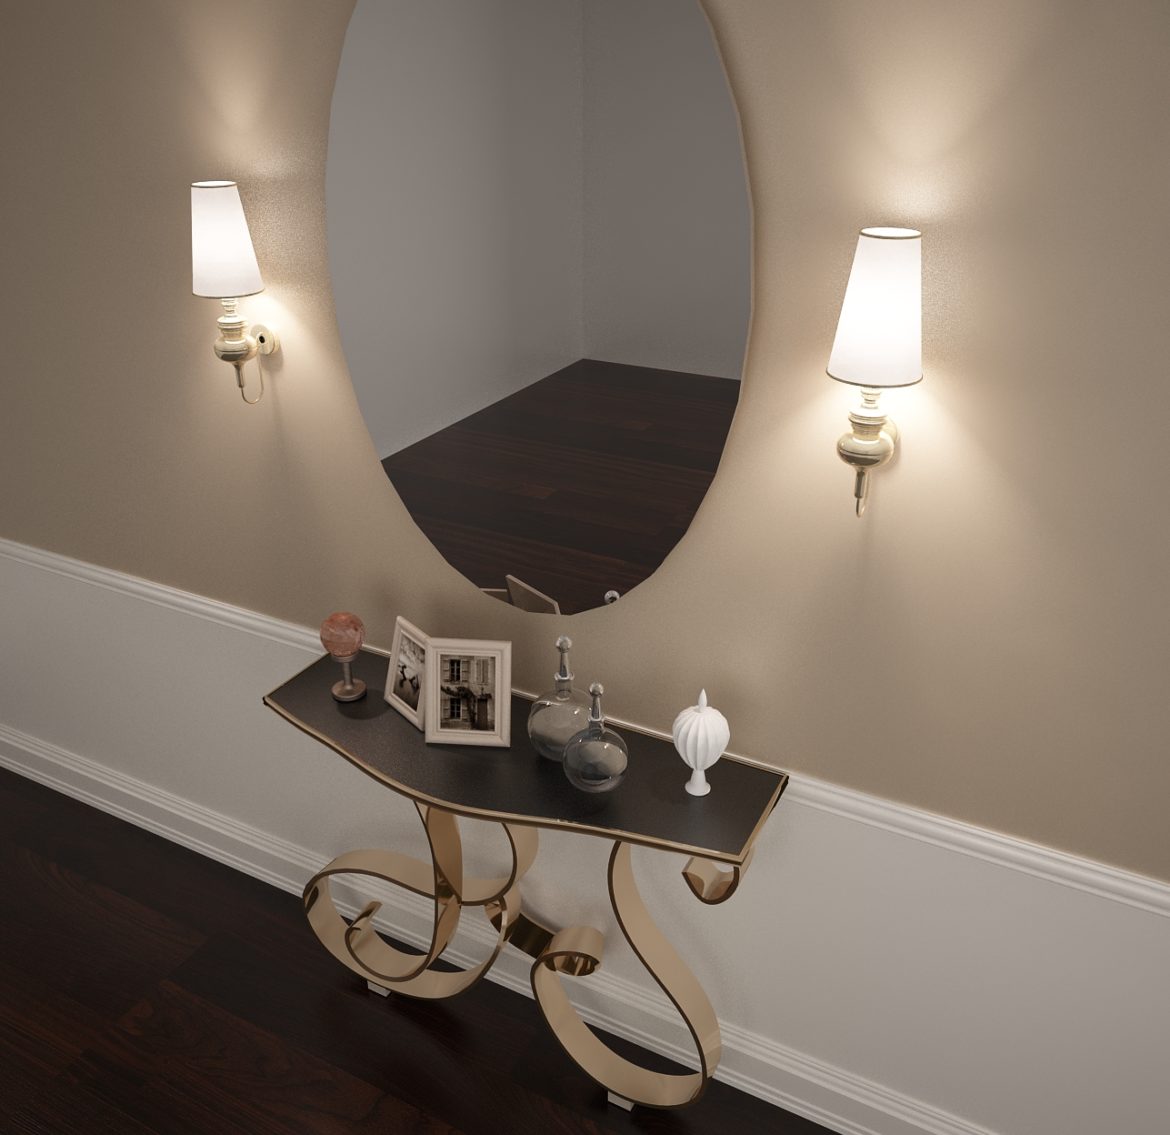 table and mirror-35 3d model max obj 297394